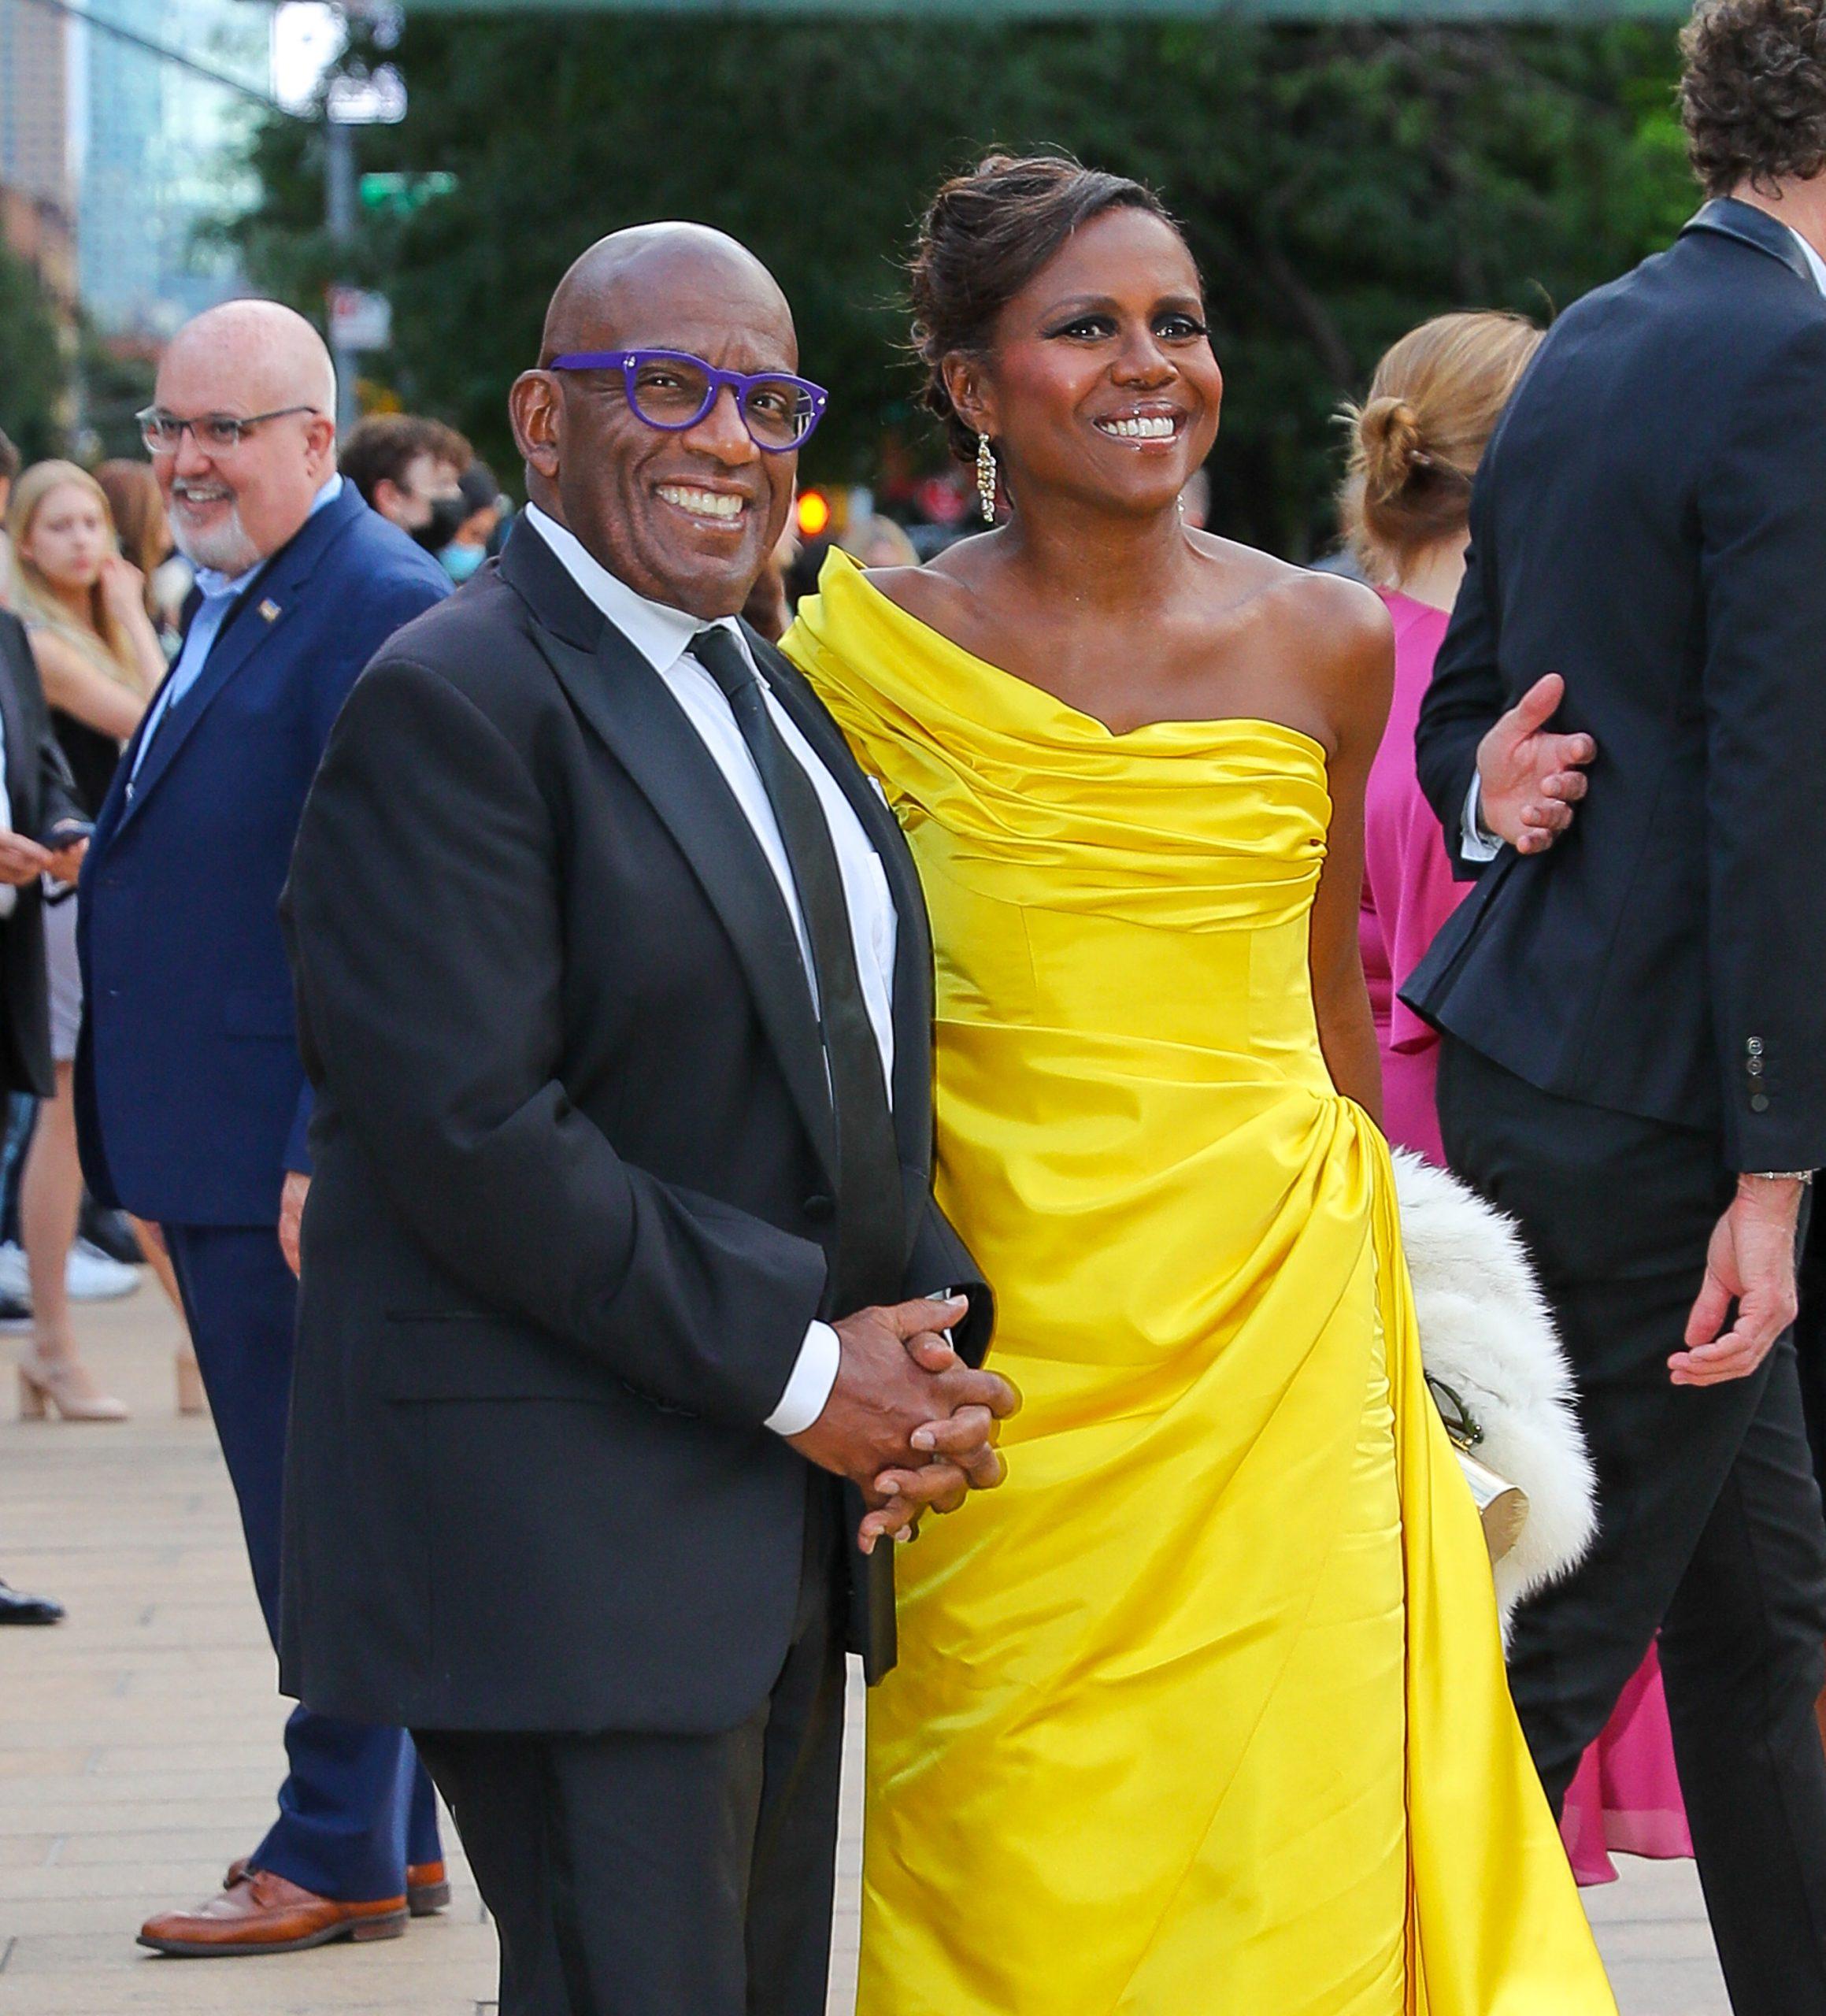 Al Roker and his wife Deborah Roberts seen arriving at the Lincoln Center in NYC on Sep 30, 2021